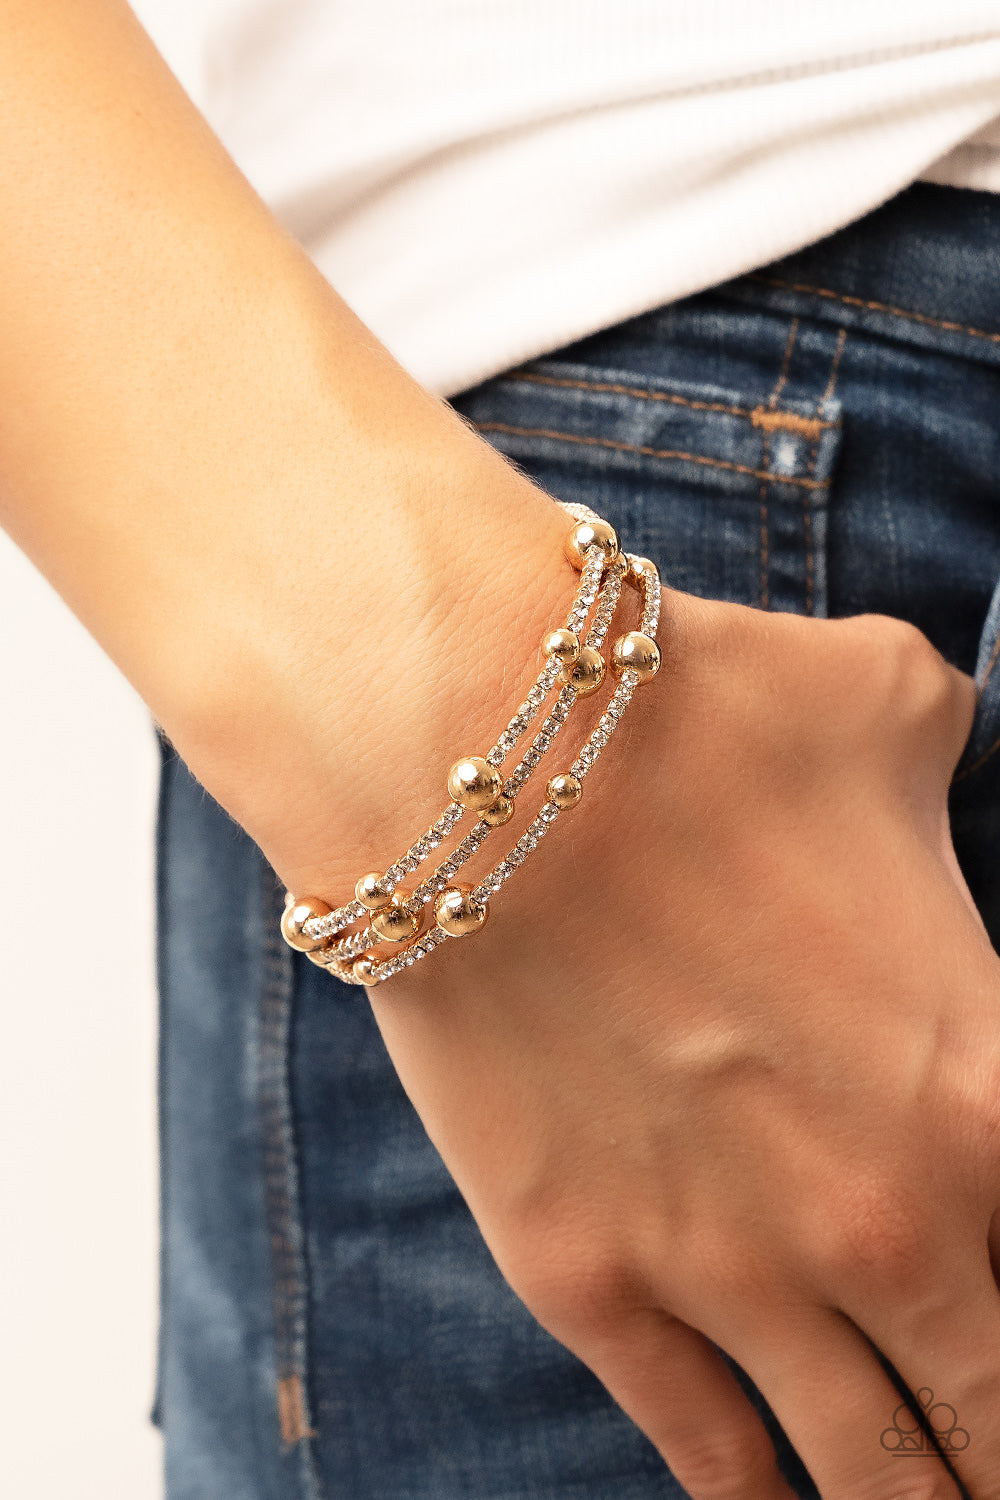 Spontaneous Shimmer Gold Bracelet - Paparazzi Accessories  Spontaneously interrupted by glistening gold beads, a sparkly strand of white rhinestones coils around the wrist, resulting in an irresistible infinity wrap bracelet.  Sold as one individual bracelet.